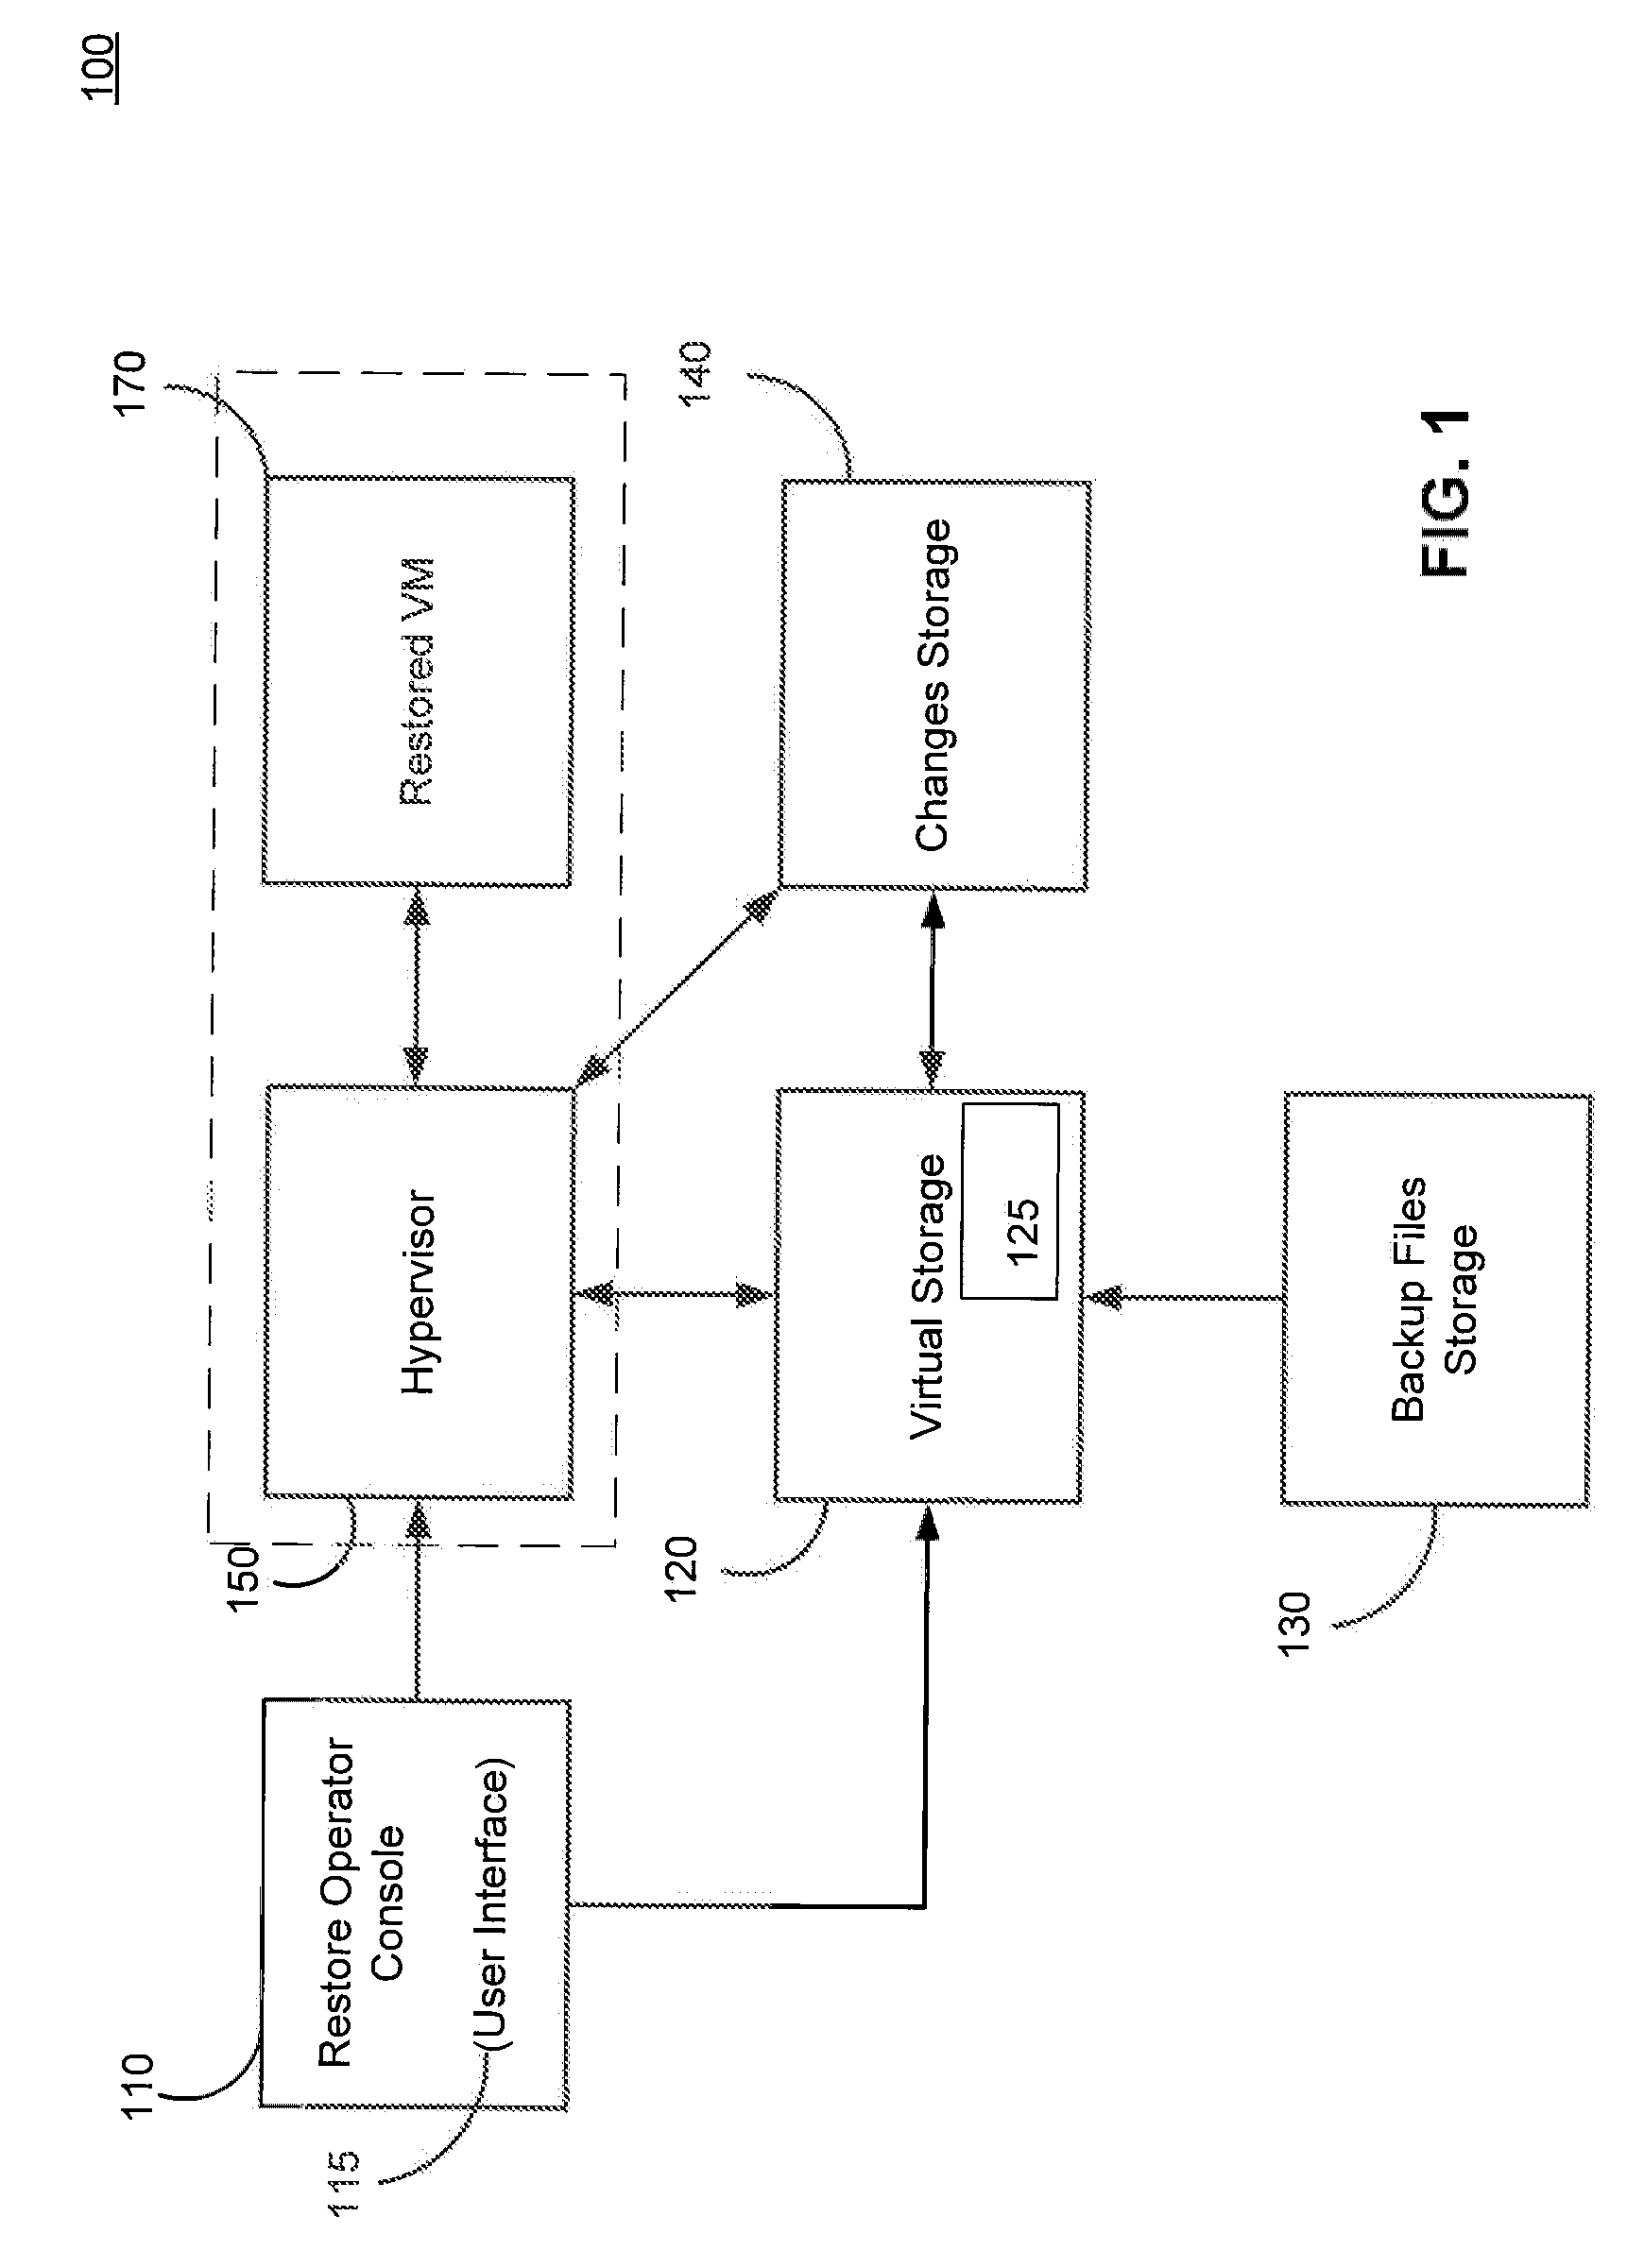 Systems, Methods, and Computer Program Products for Instant Recovery of Image Level Backups